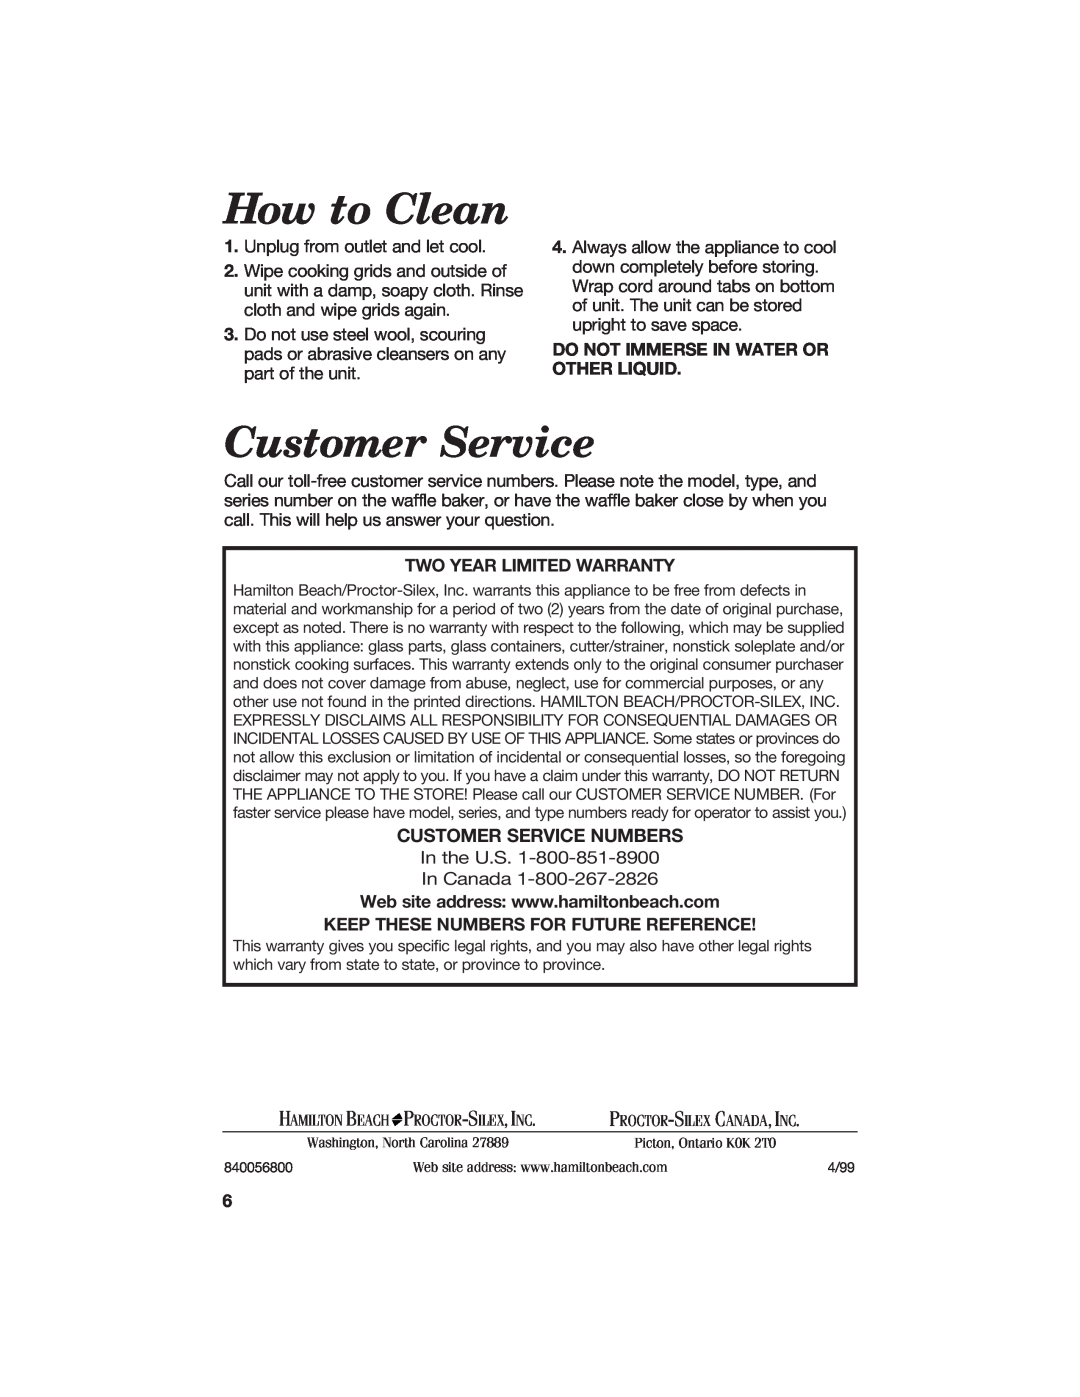 Hamilton Beach 840056800 manual How to Clean, Do Not Immerse In Water Or Other Liquid, Customer Service Numbers 